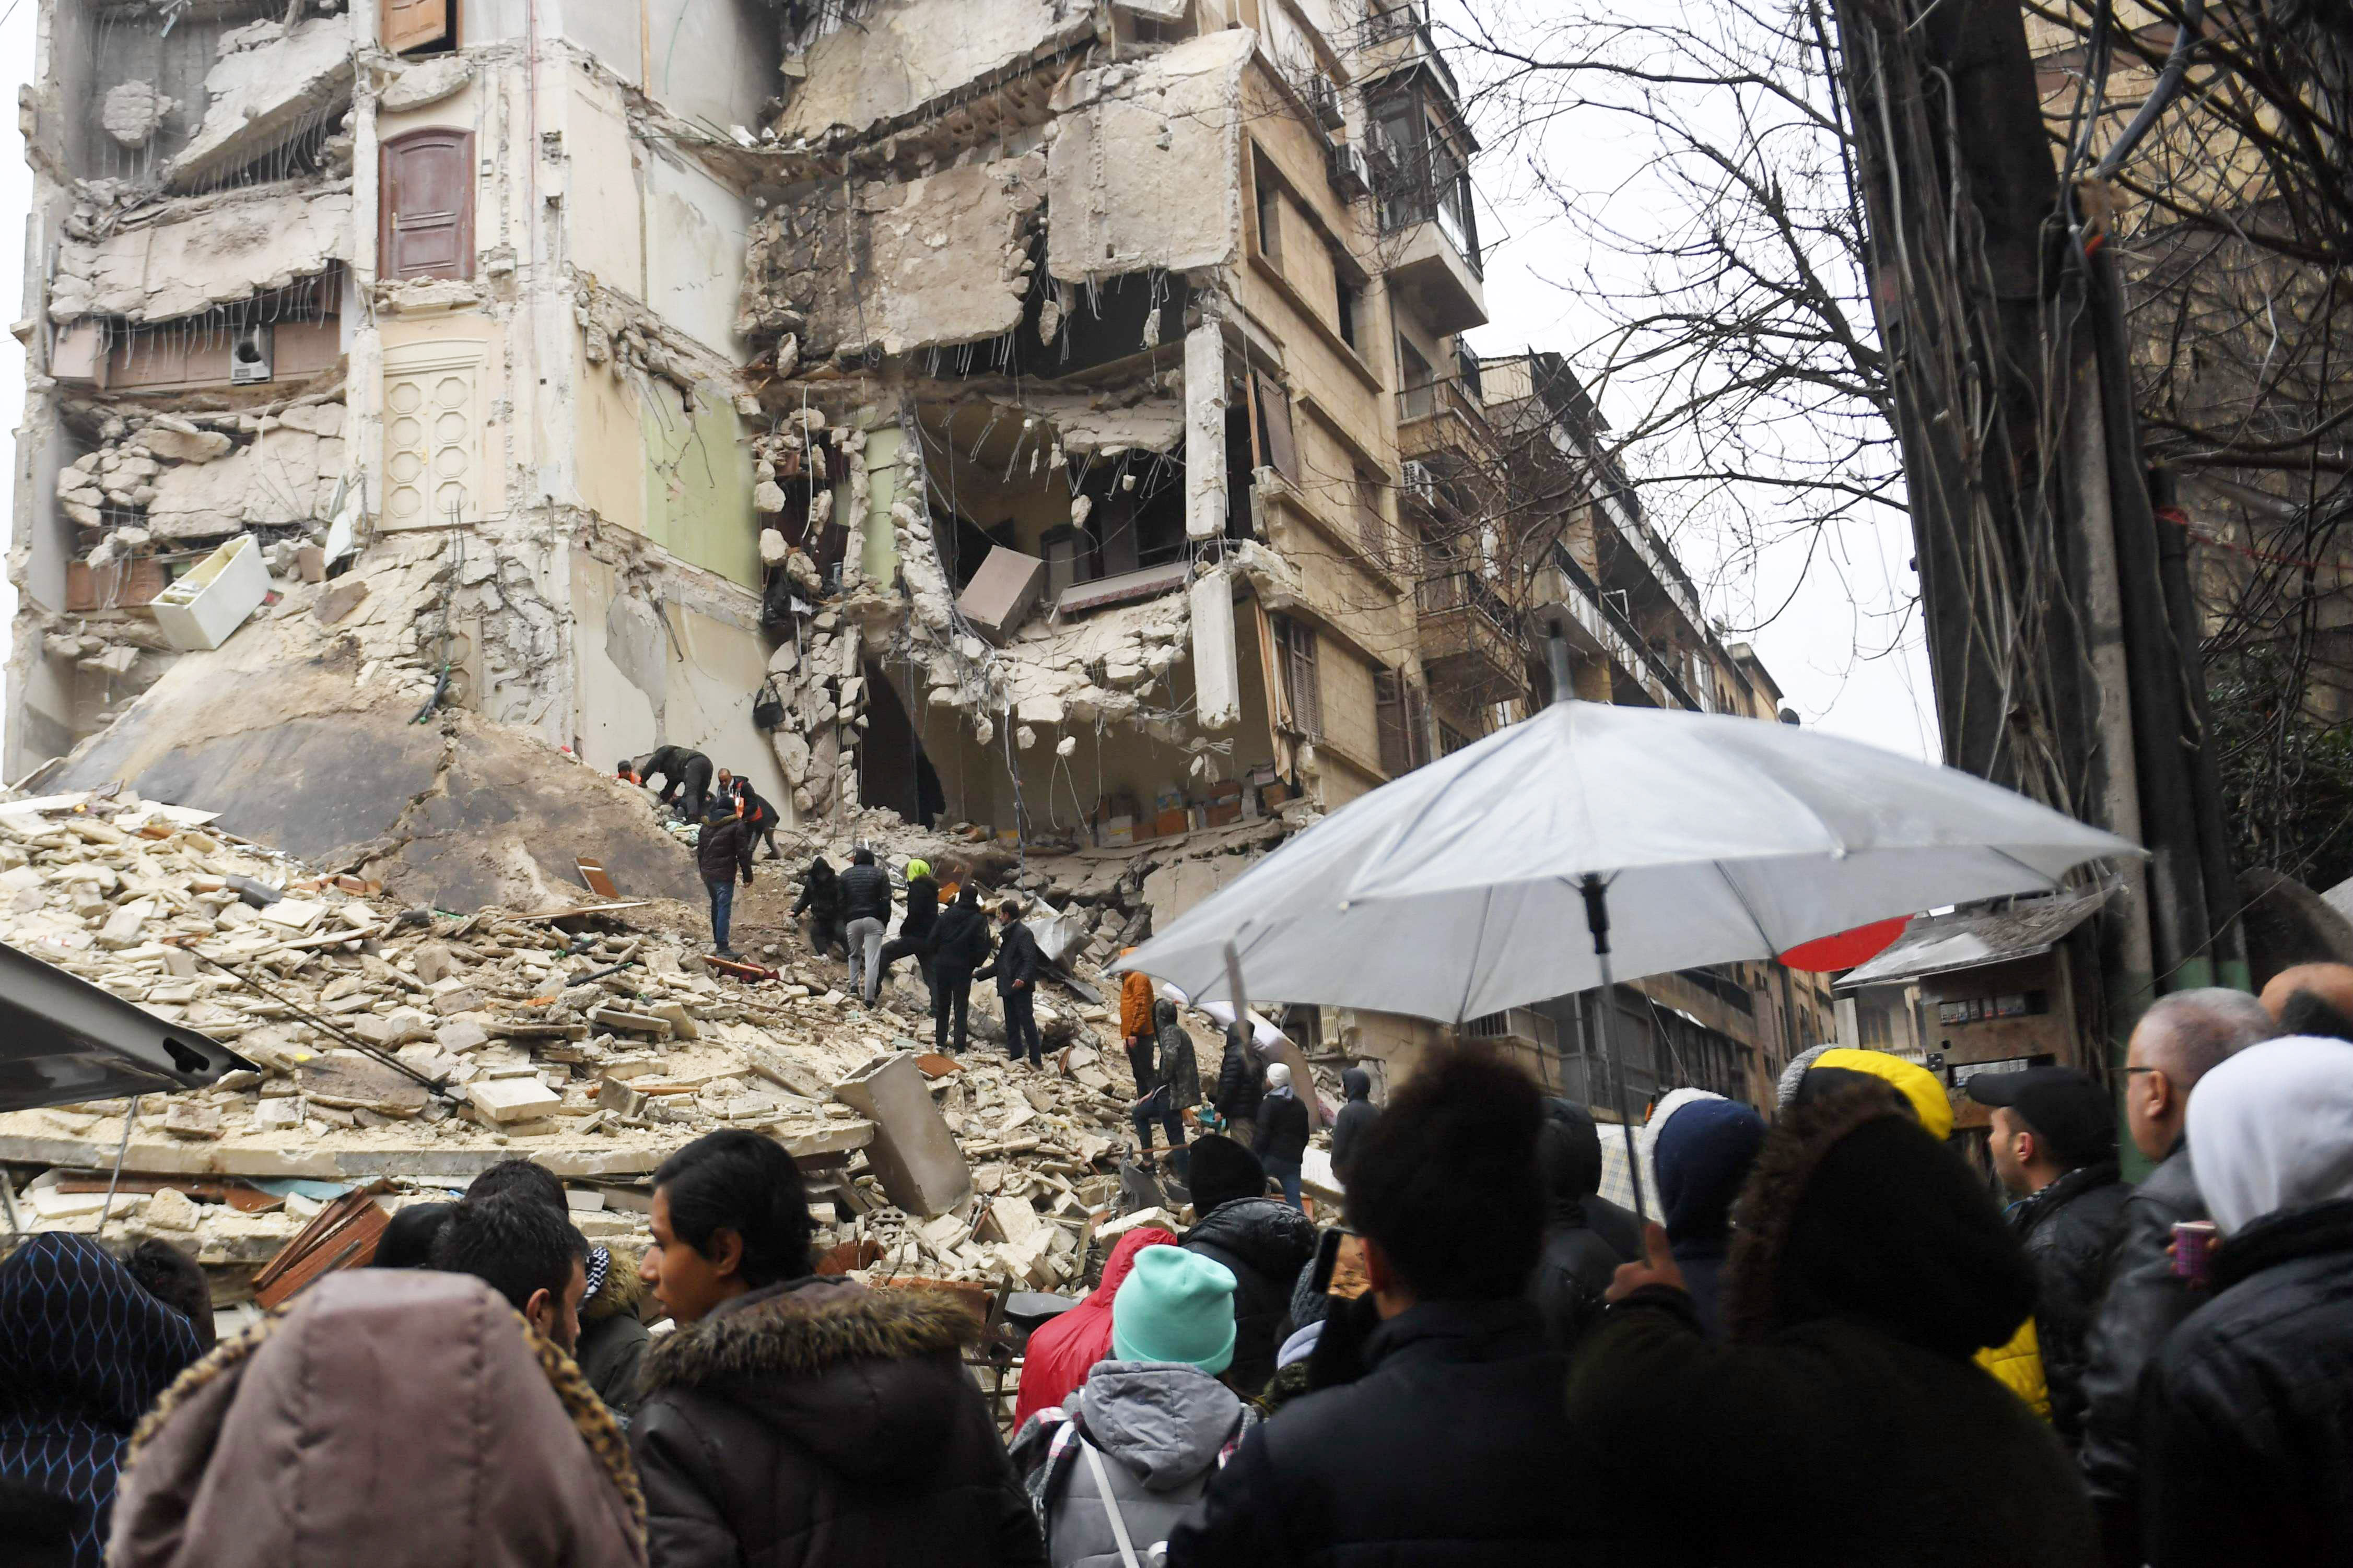 Finland’s Niinistö, Marin expresses her condolences to Turkey after the earthquake